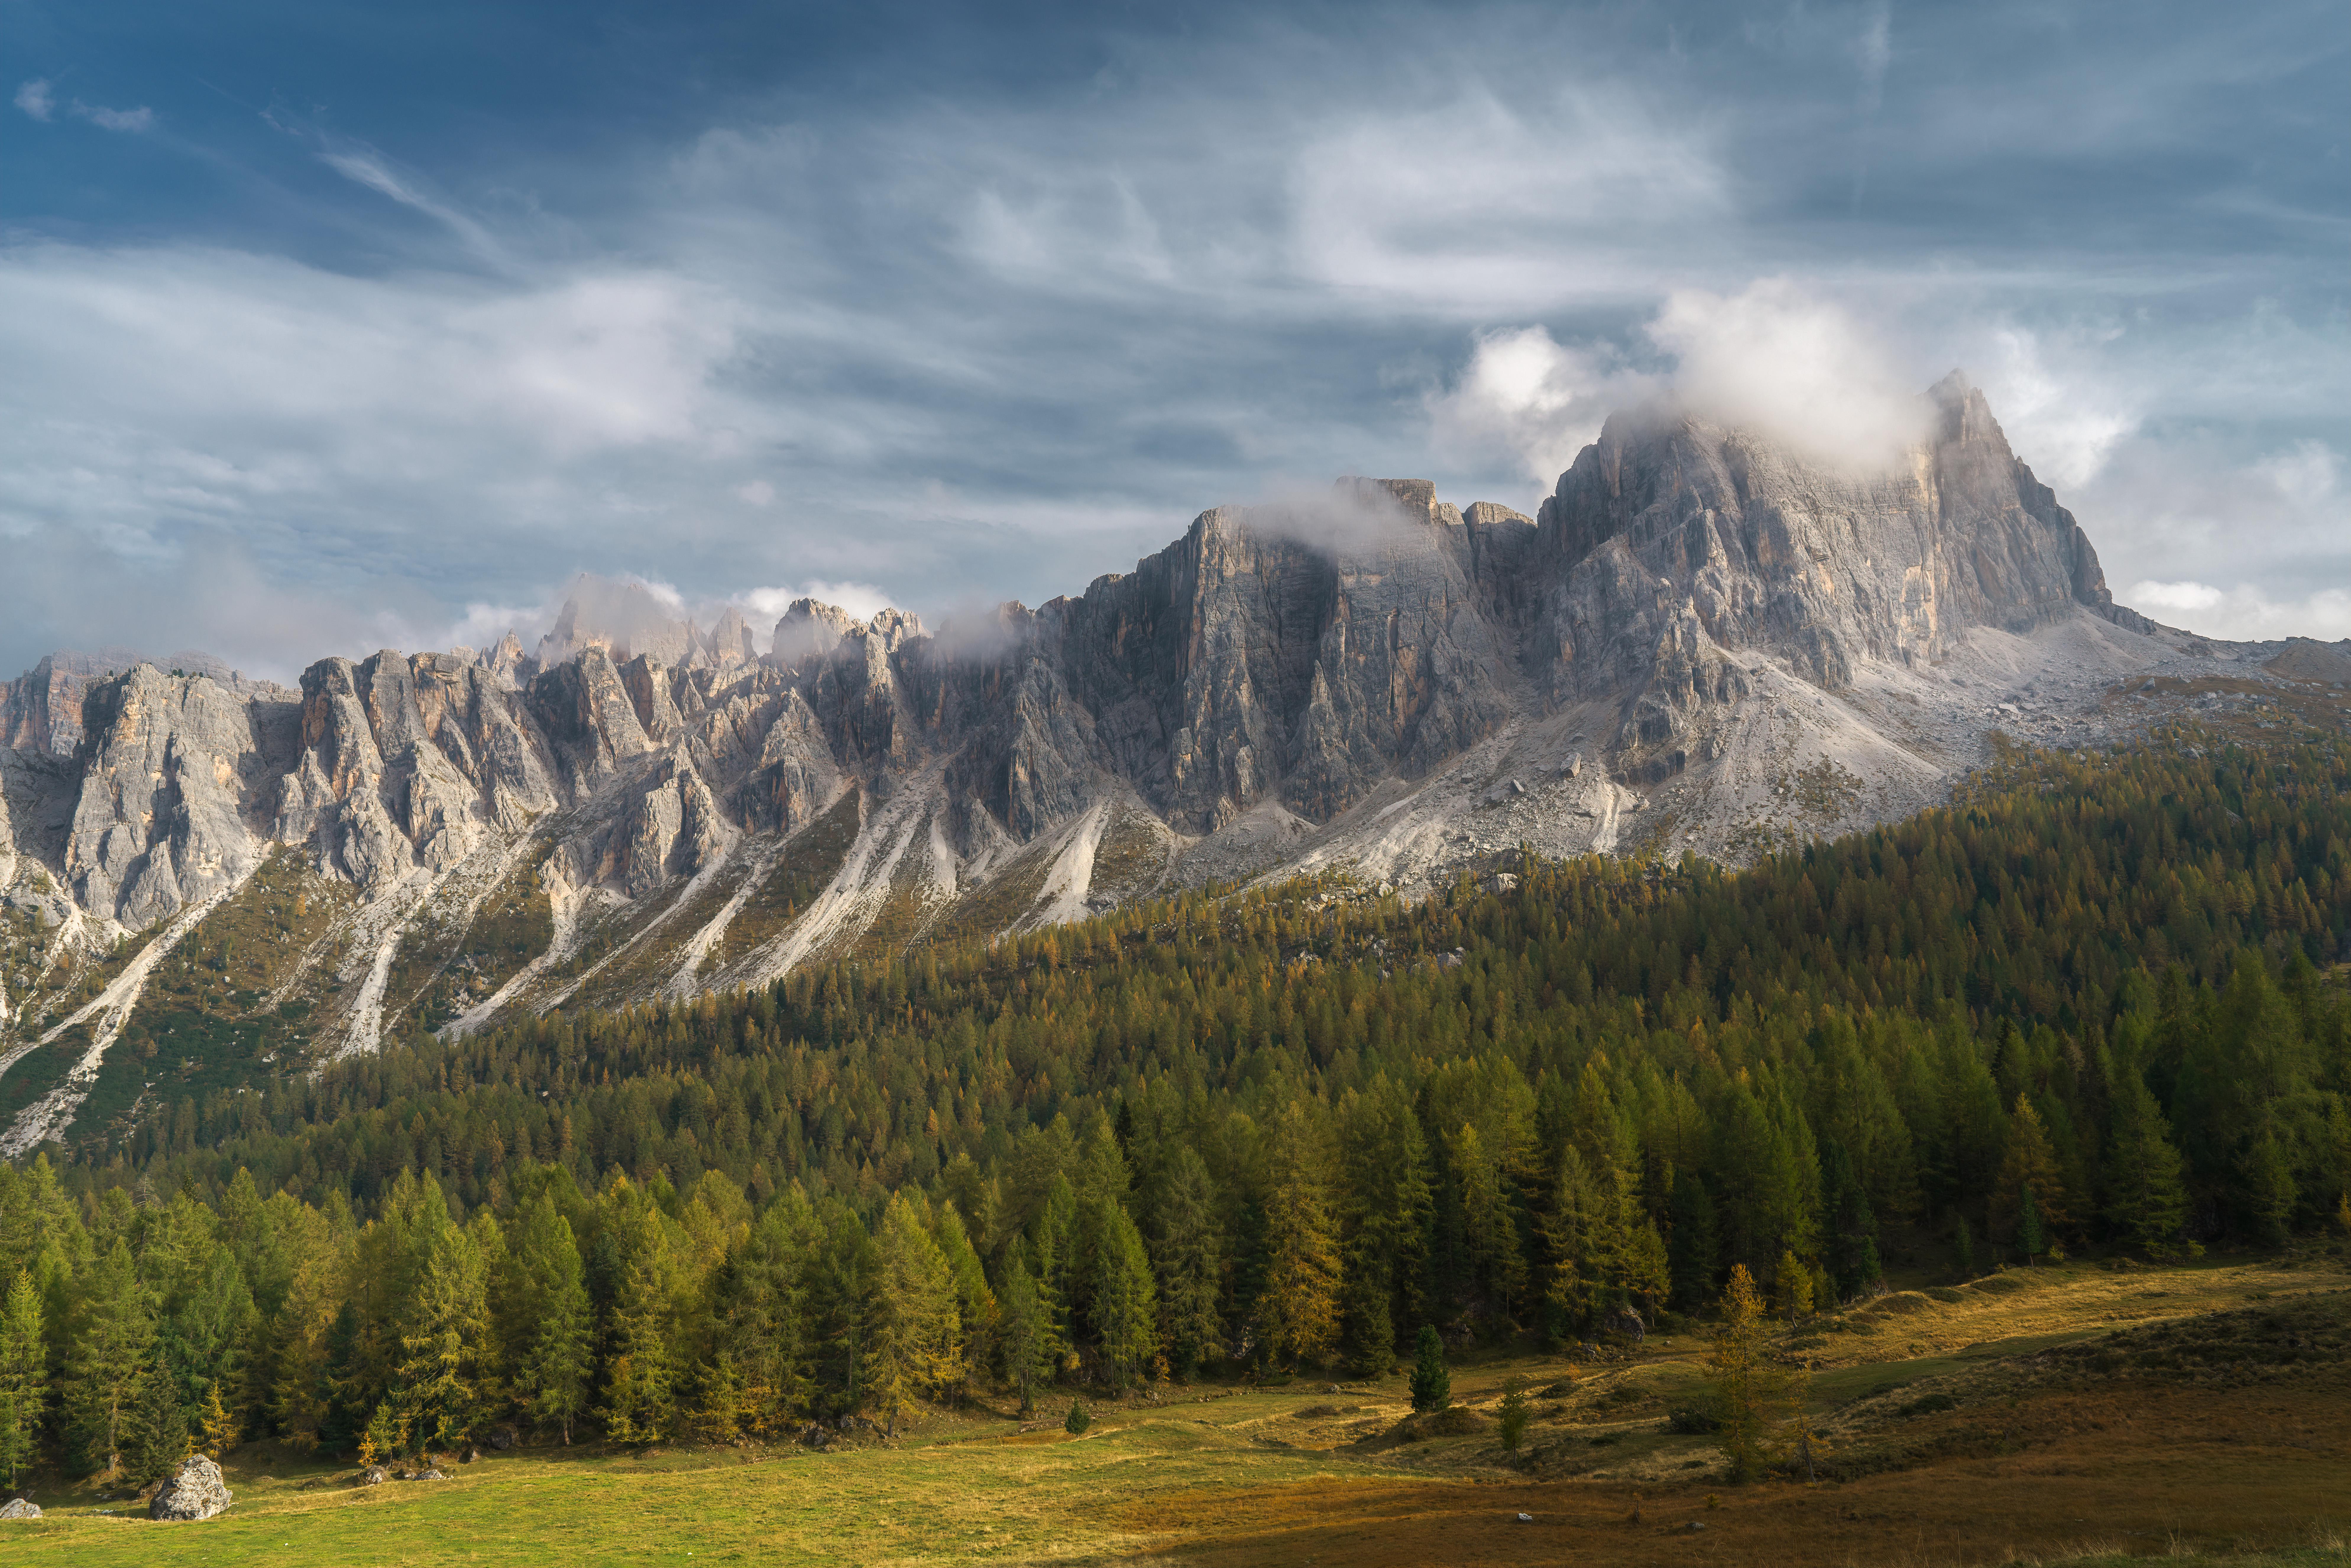 General 7952x5304 landscape nature Dolomites Alps Italy Europe mountains cliff forest field clouds trees sky